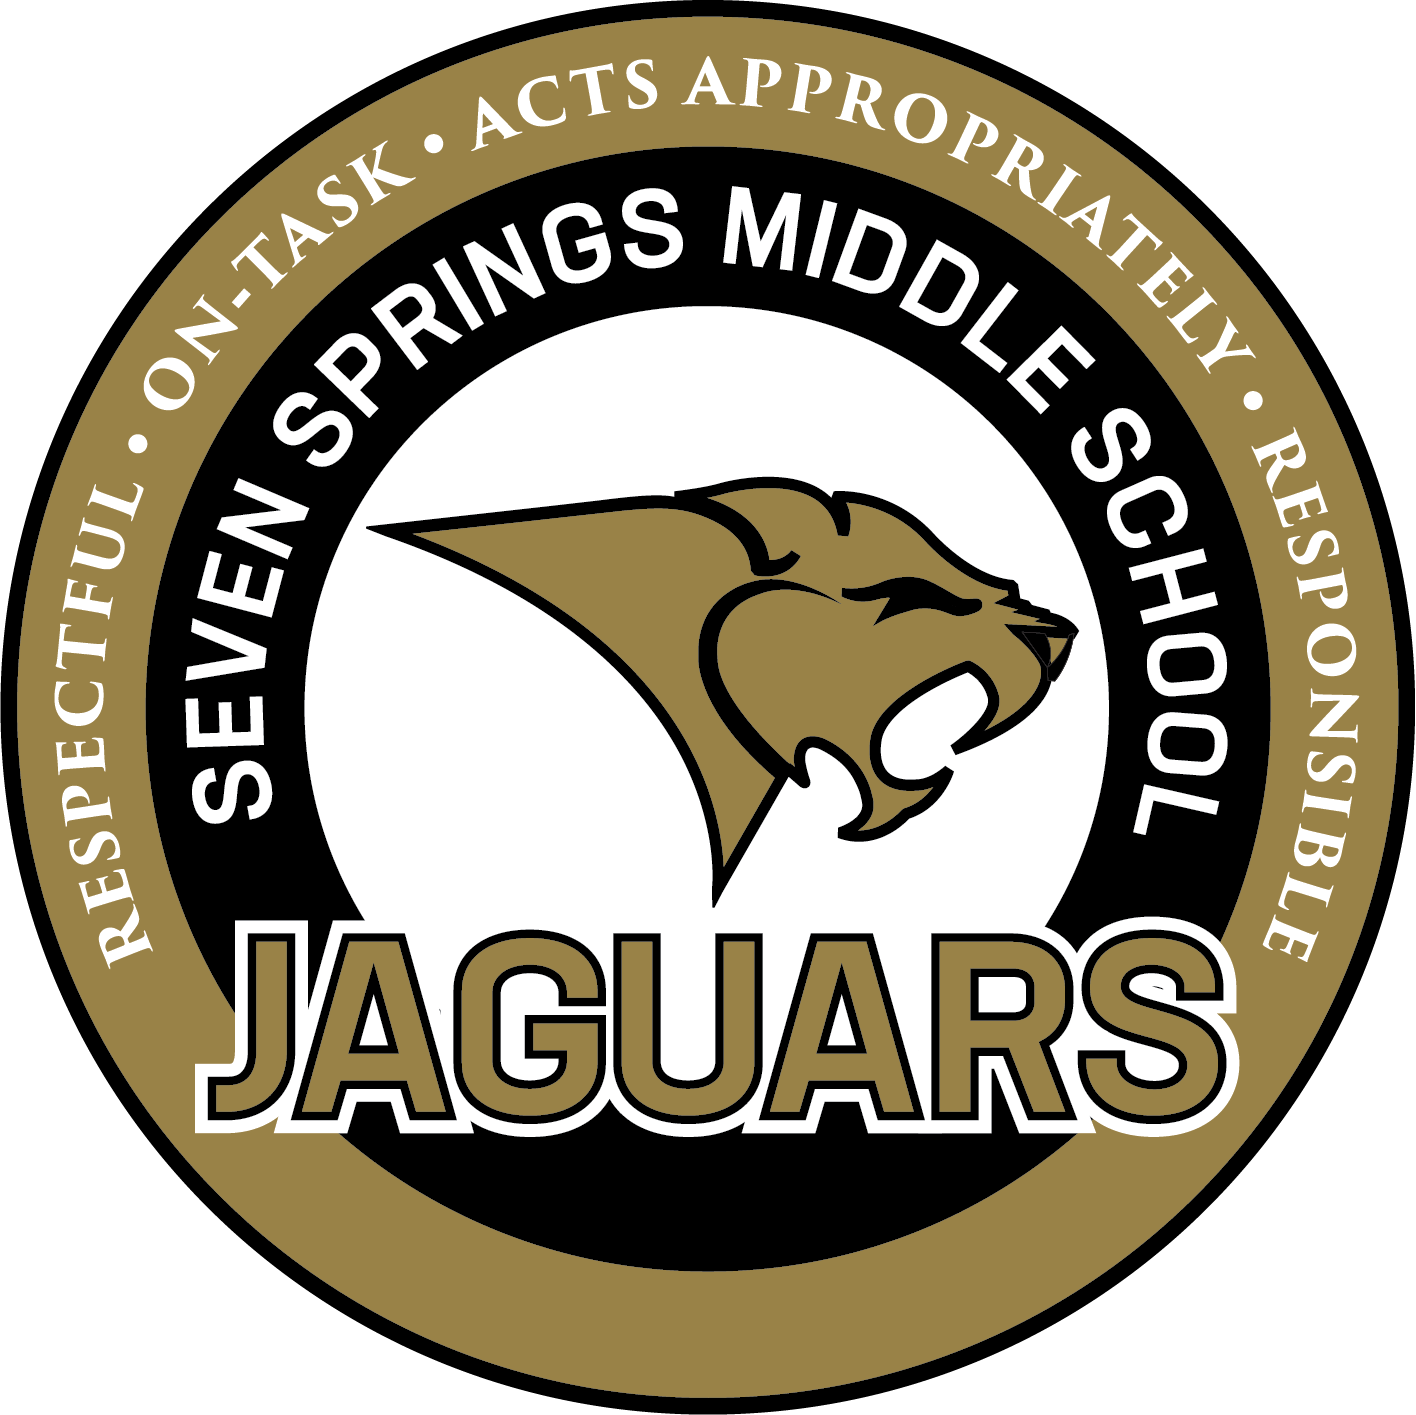 Seven Springs Middle School